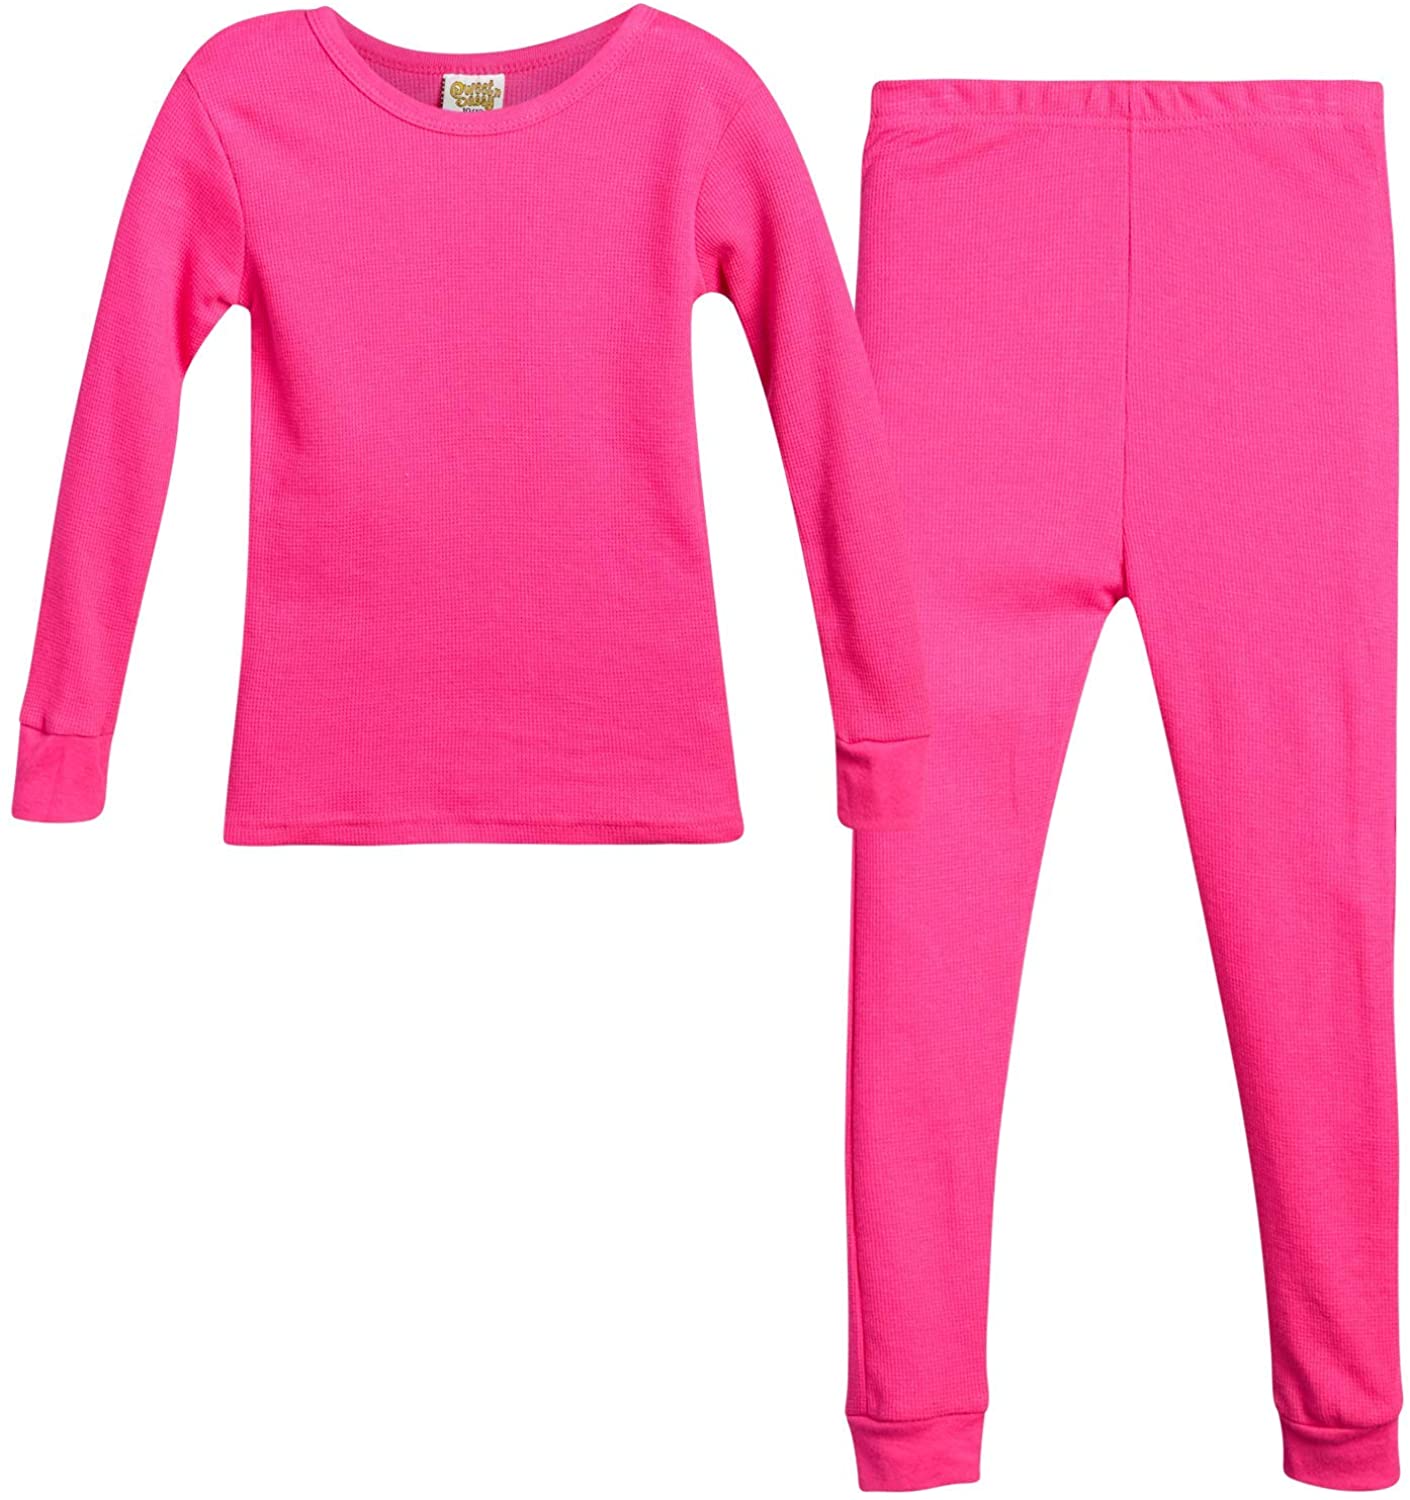 Sweet & Sassy Girls 2-Pack Thermal Warm Underwear Top and Pant Set 